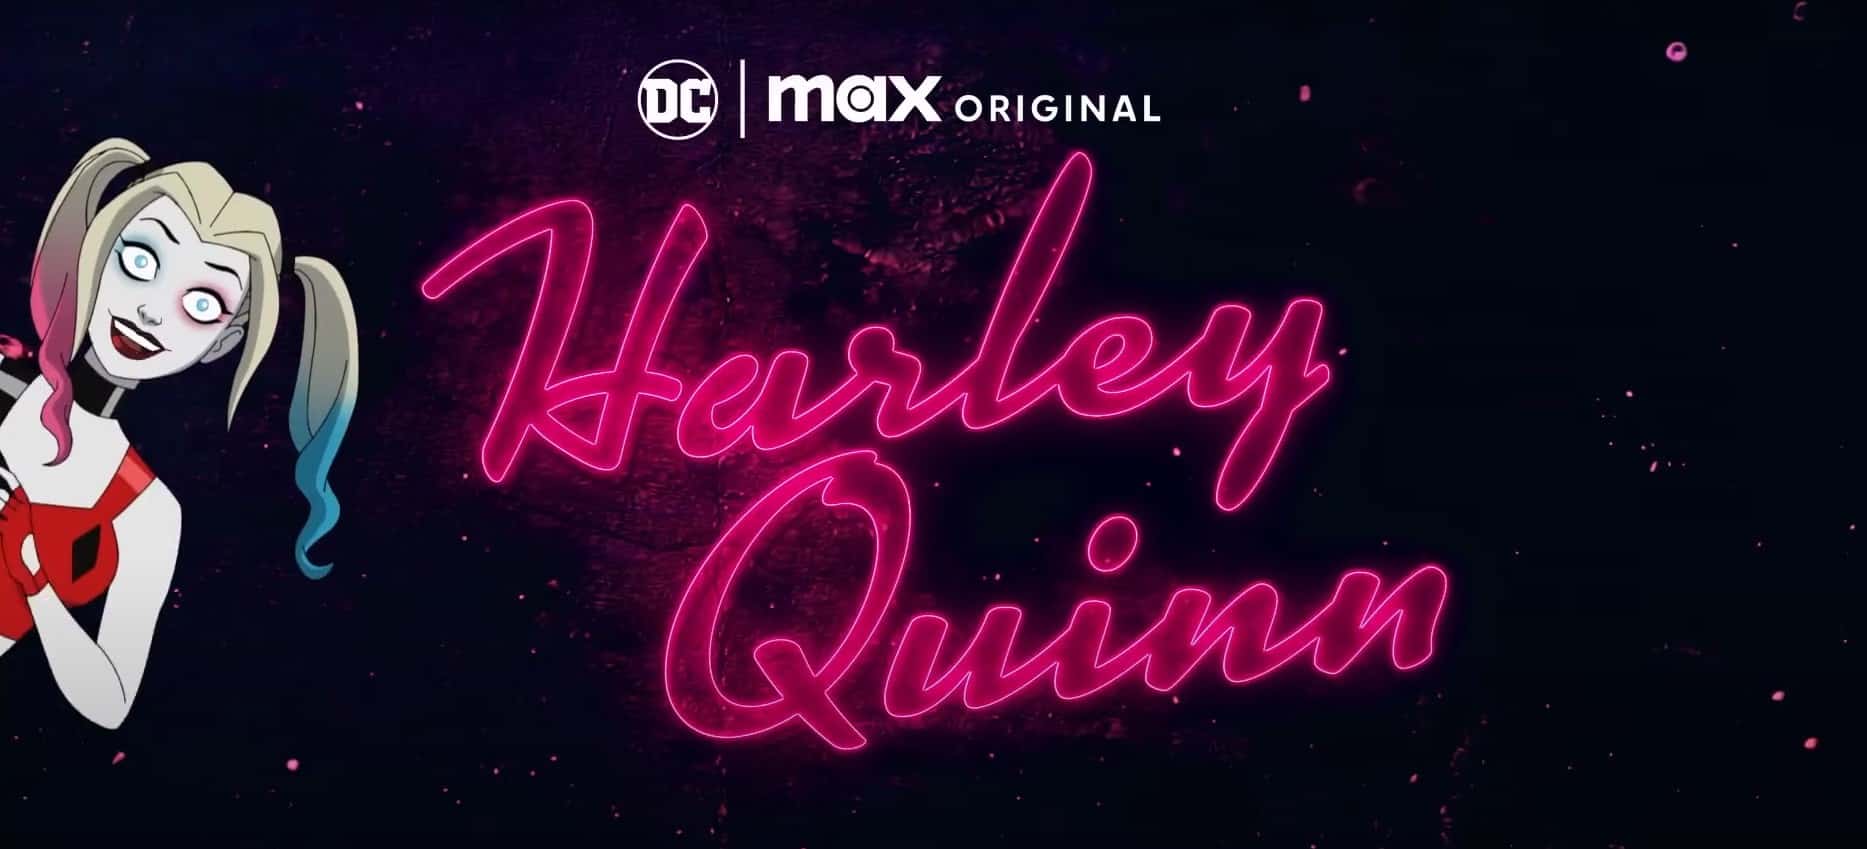 Harley Quinn Season 4 Episode 1: Release Date, Preview & Streaming ...